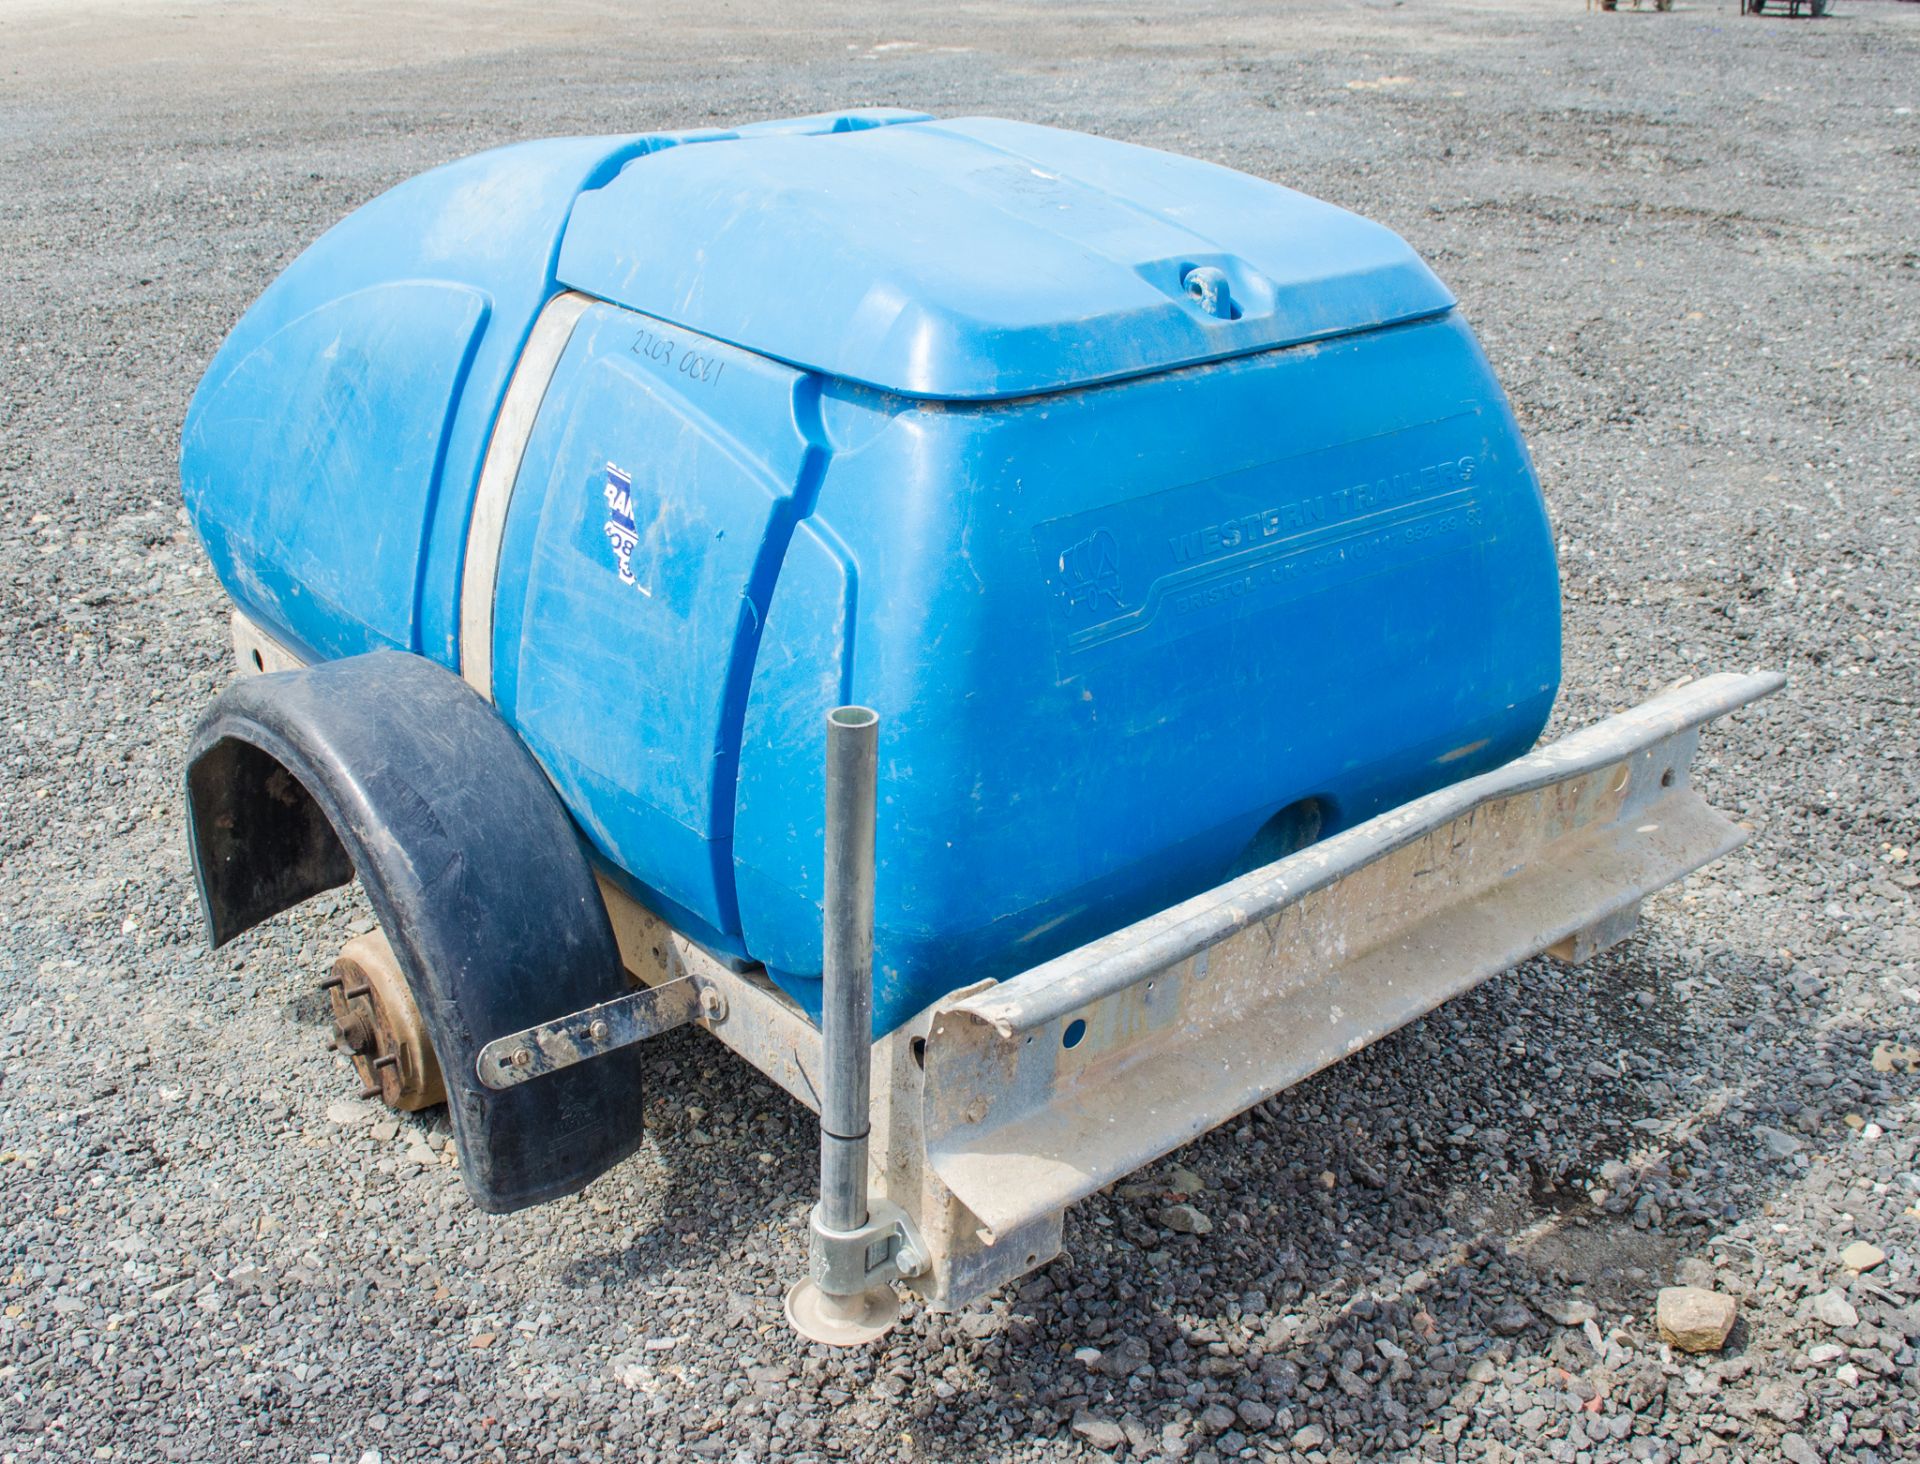 Western 250 gallon fast tow water bowser 2203-0061 ** Wheels missing ** - Image 2 of 2